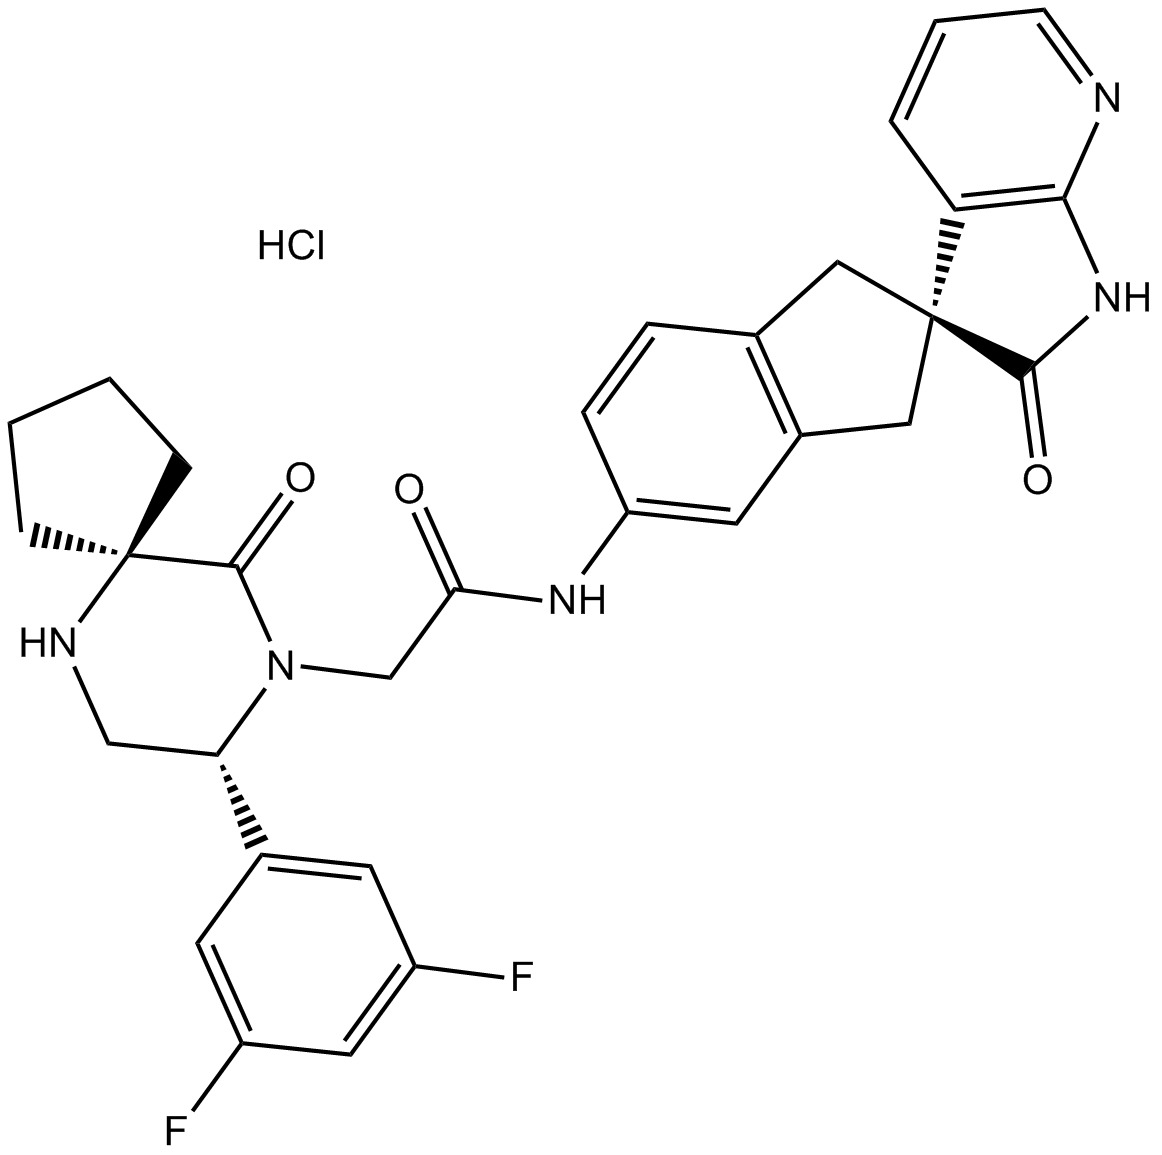 MK-3207 HCl  Chemical Structure